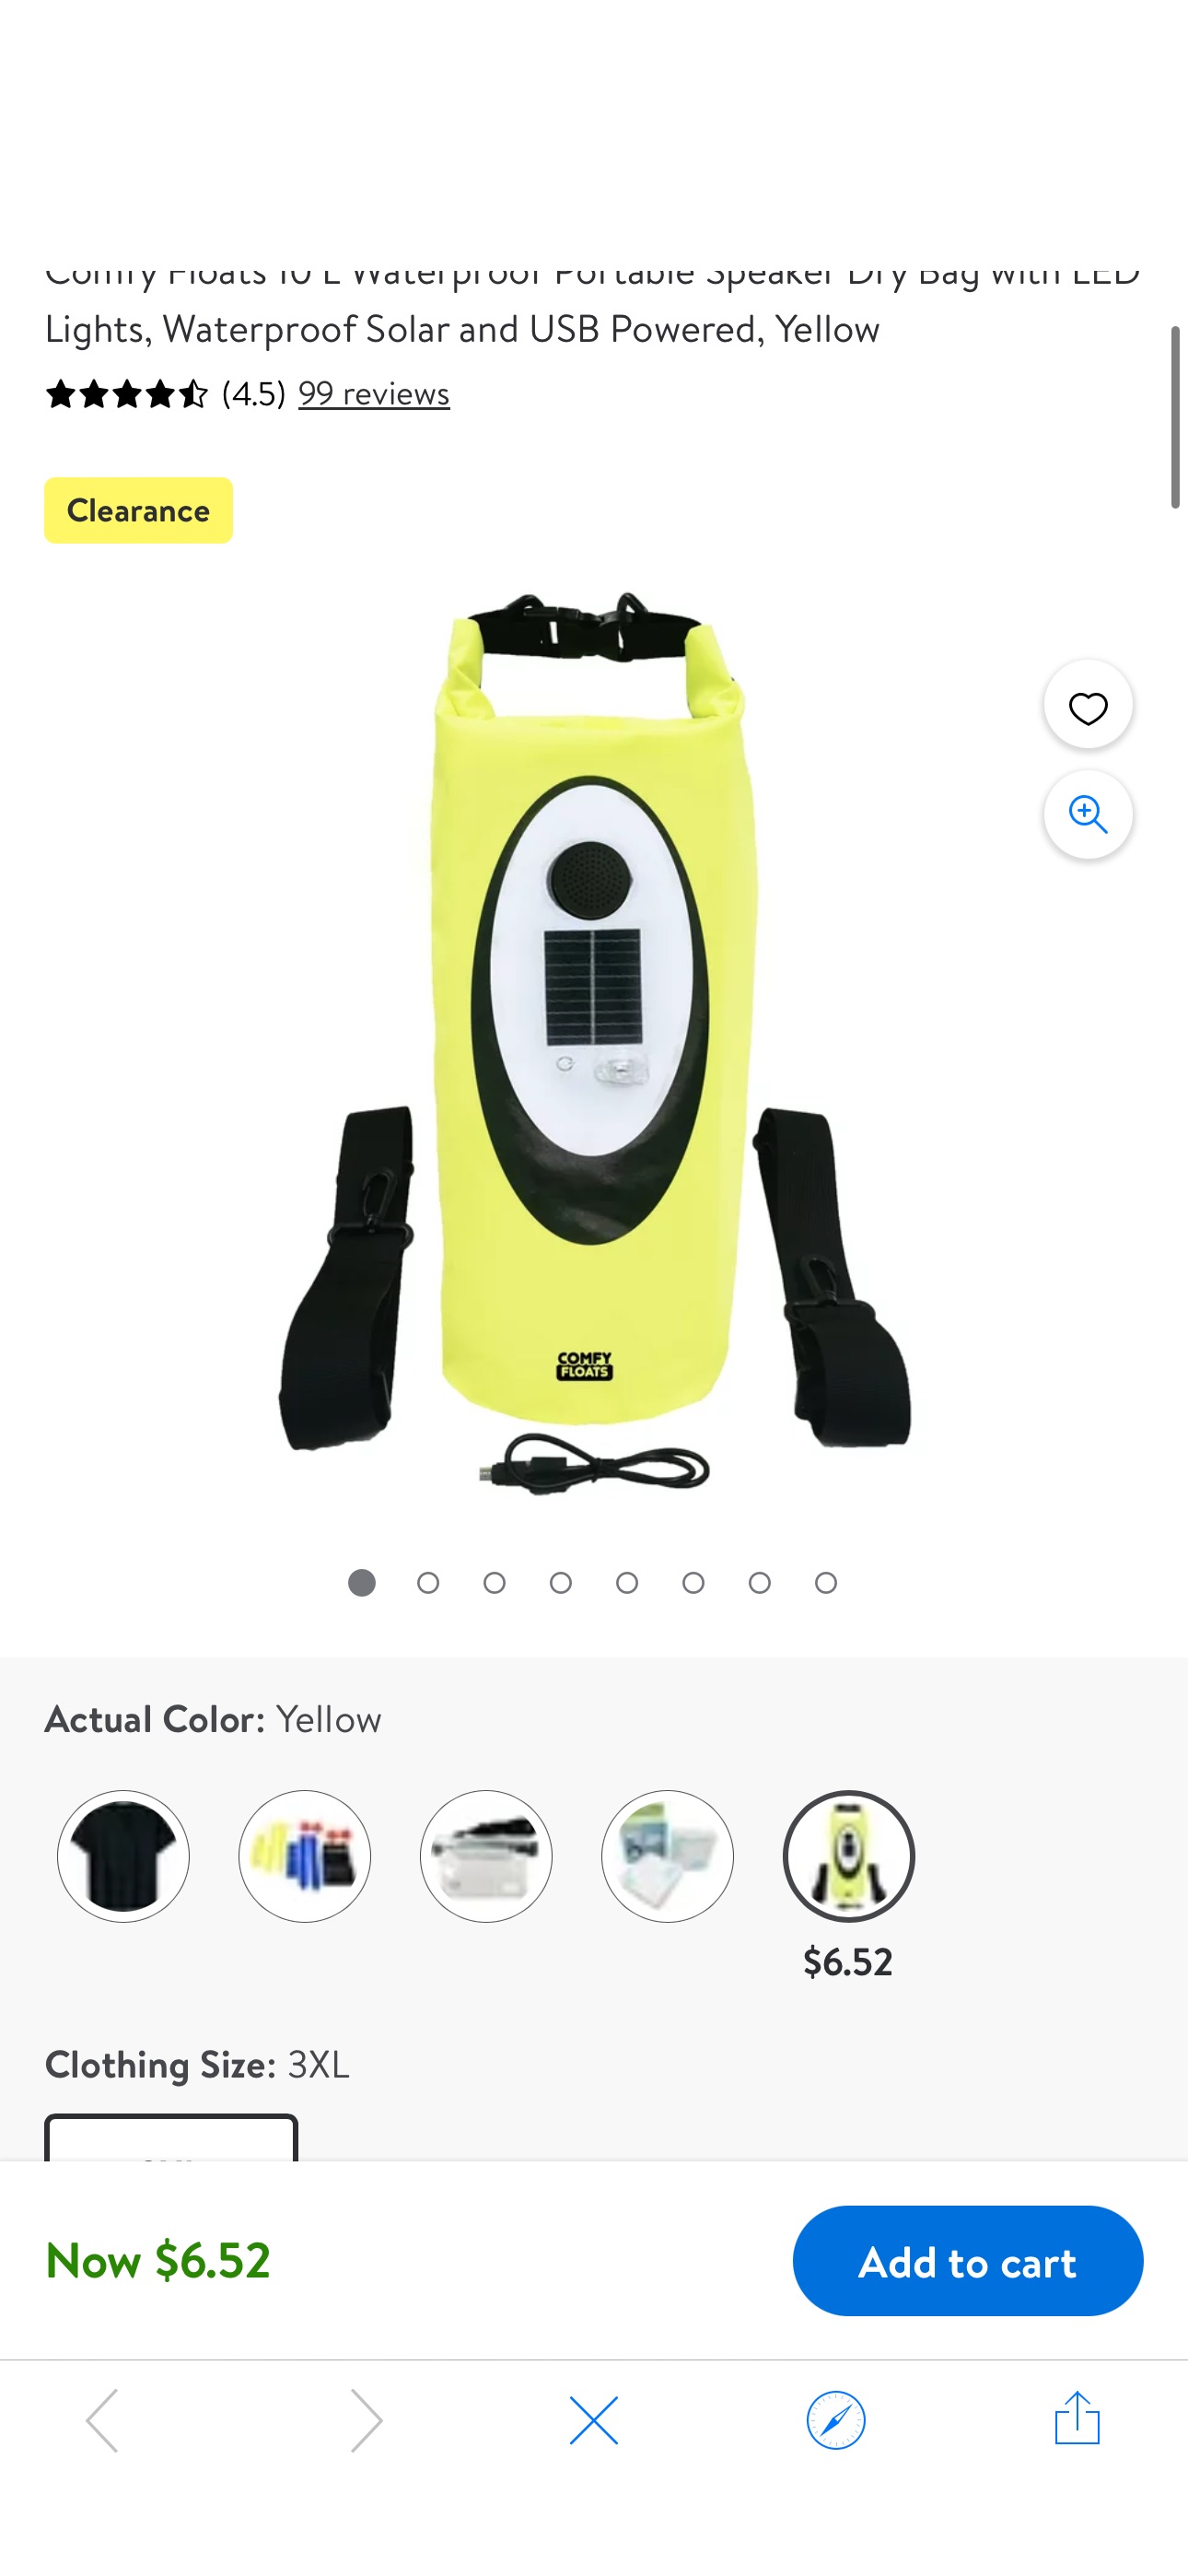 Comfy Floats 10 L Waterproof Portable Speaker Dry Bag with LED Lights, Waterproof Solar and USB Powered, Yellow - Walmart.com